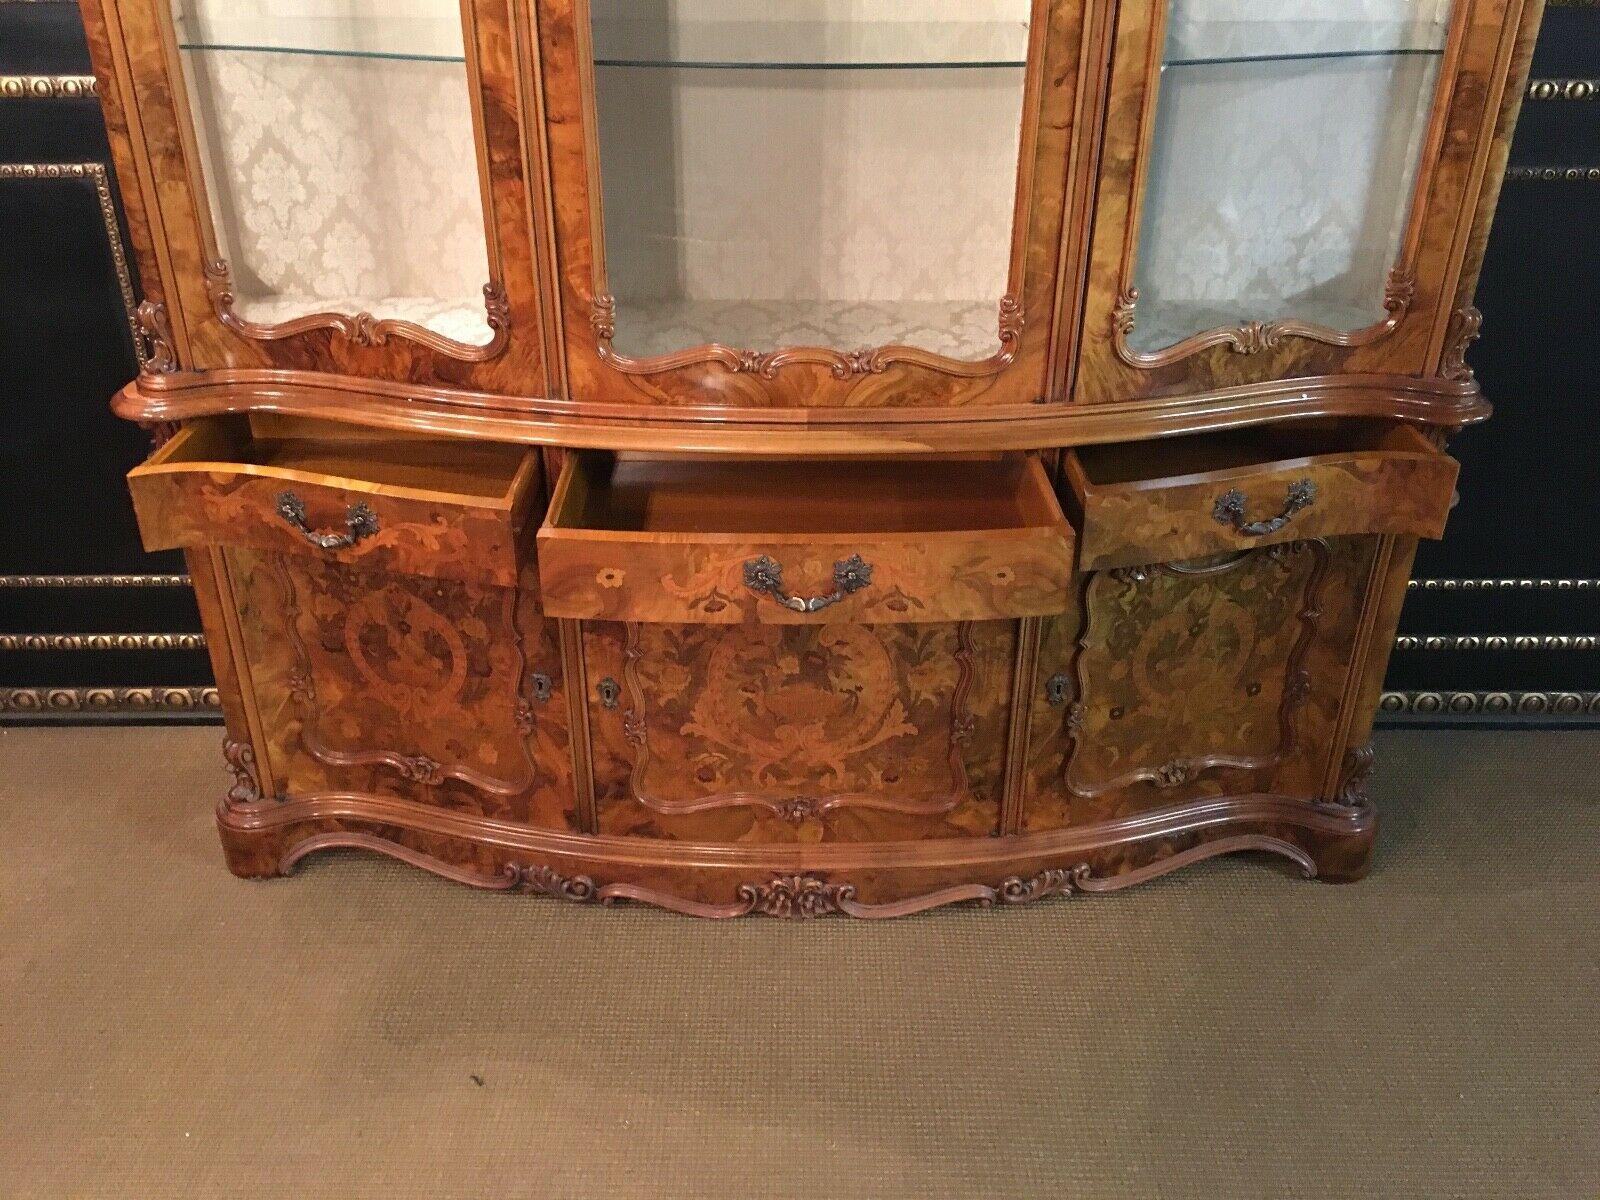 20th Century Baroque Style Showcase 3 Sides Glazed with Root Wood Veneer